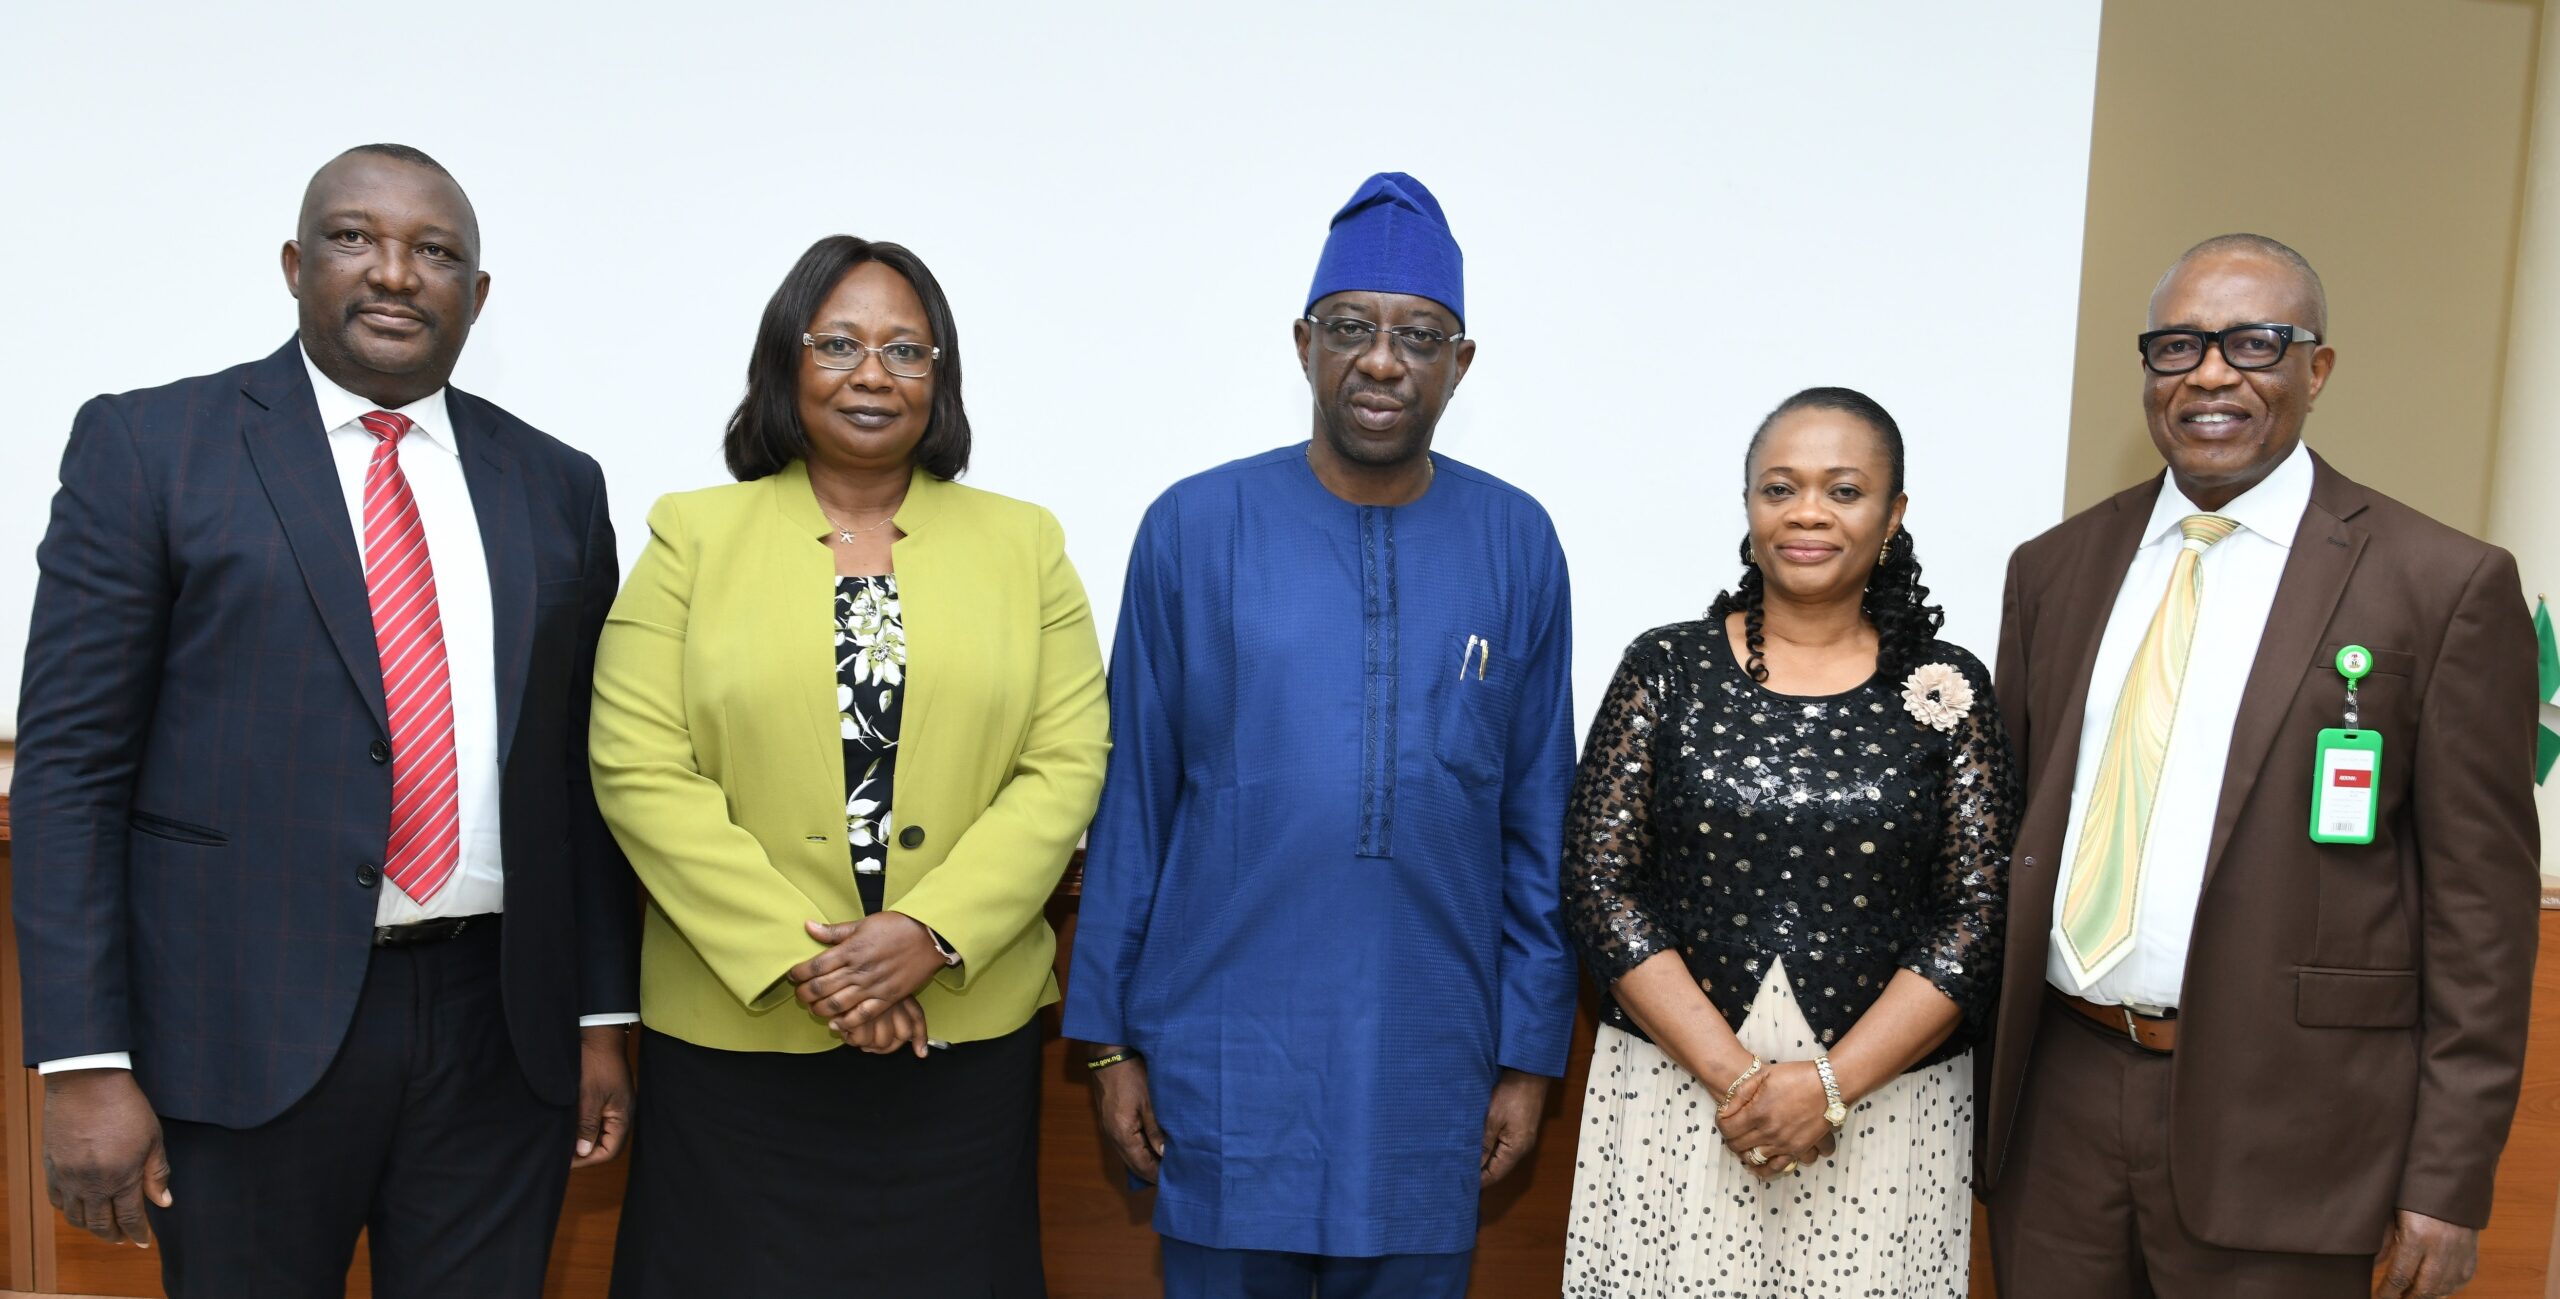 L-R: Banji Ojo, Head, Consumer Policy Development and Monitoring, Nigerian communications Commission (NCC); Olayemi Ajayi, Director, Legal Services, National Lottery Regulatory Commission (NLRC); Adeleke Adewolu, Executive Commissioner, Stakeholder Management, NCC; Chizua Whyte, Head, Operator Relation and Correspondence, NCC and Obi Iregbu, Deputy Director, Licensing and Regulatory Services, NLRC, at the inauguration of a joint-committee to review existing Memorandum of Understating (MoU) between the two agencies in Abuja recently (September 29, 2022).